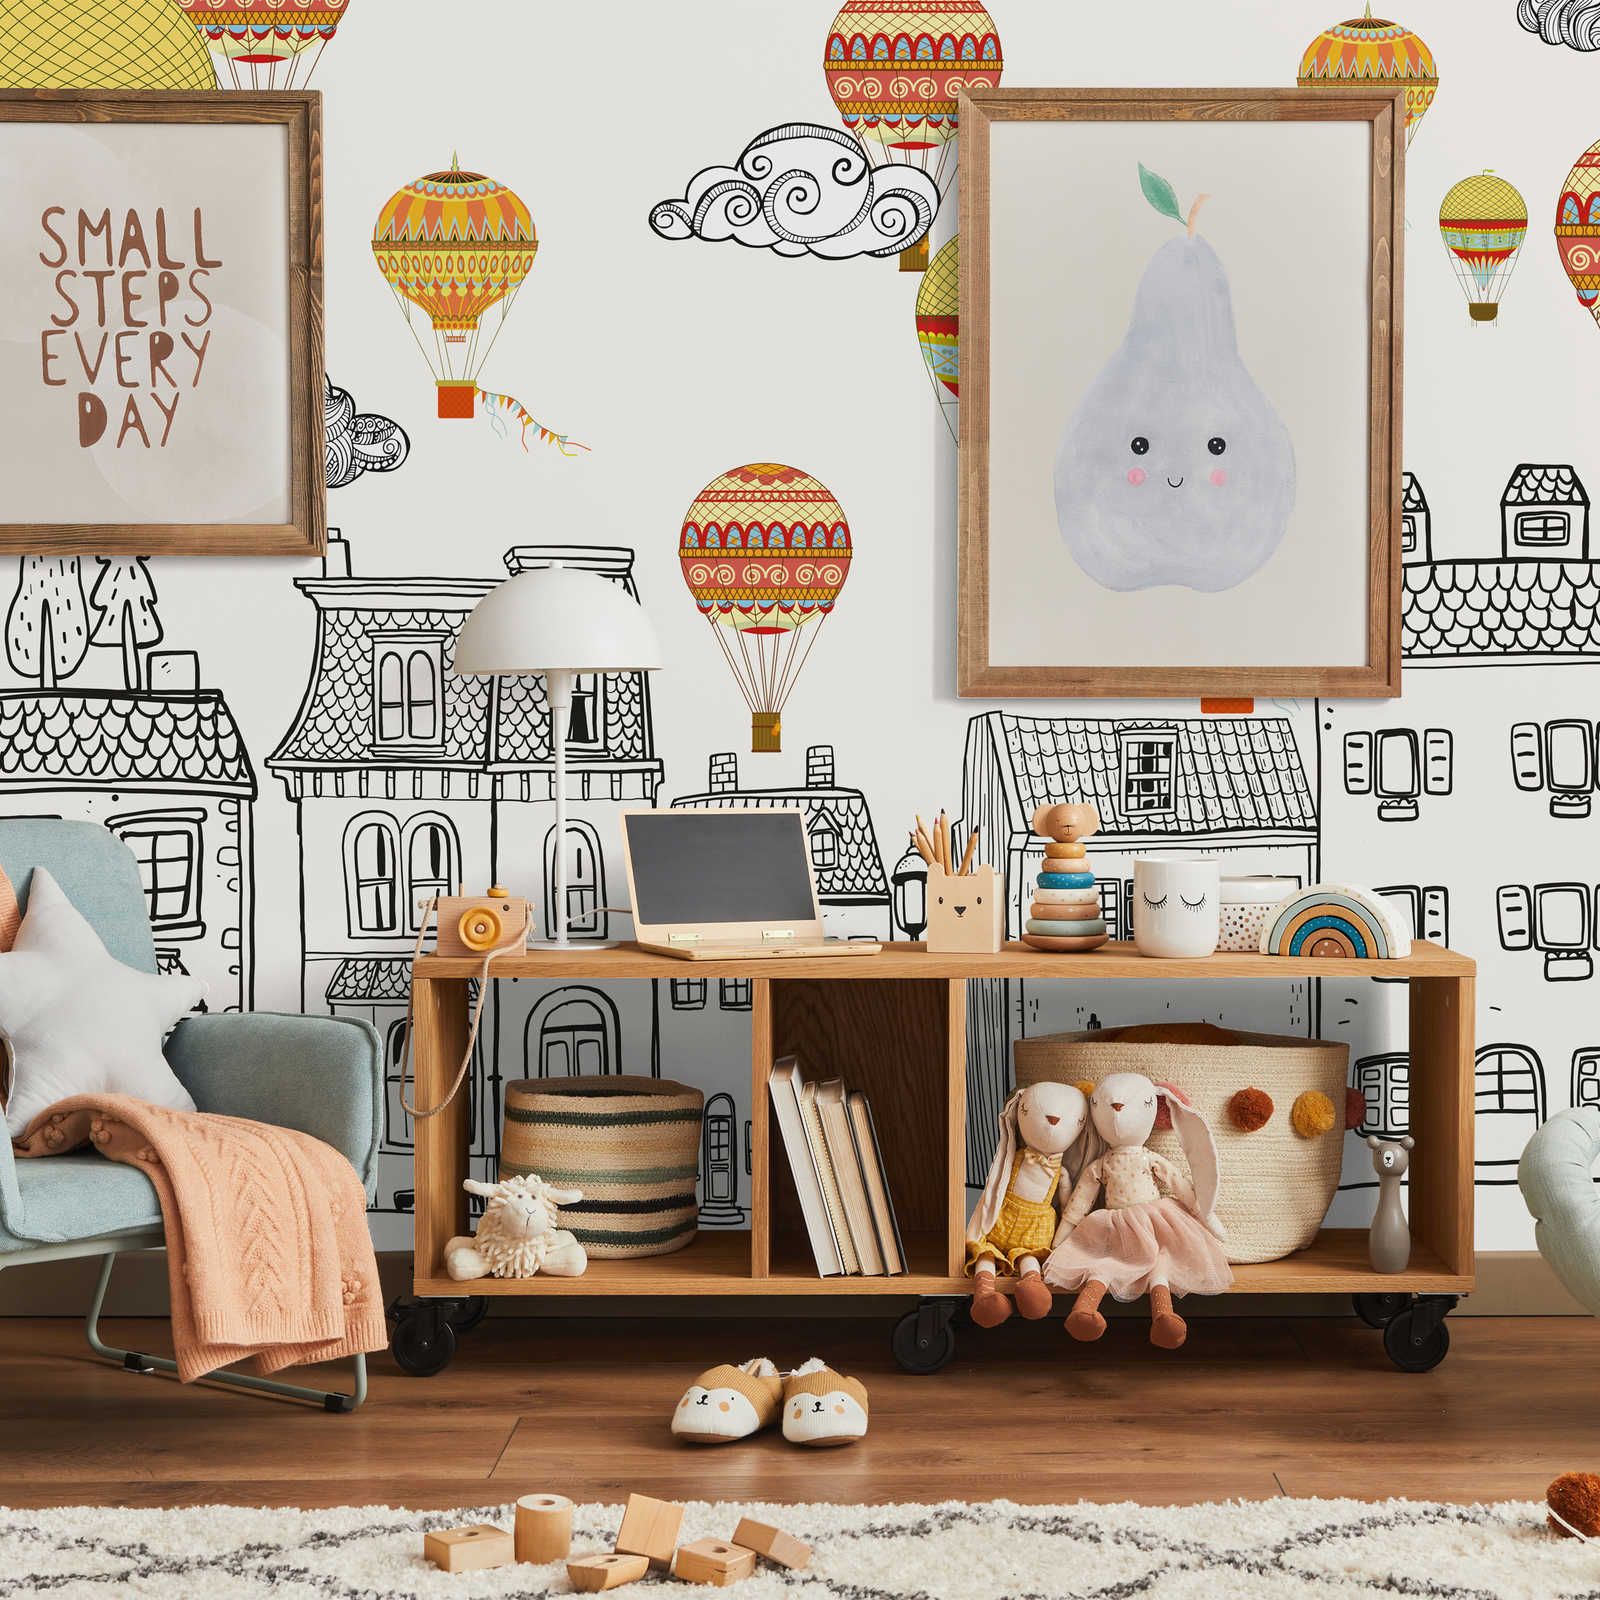 Small Town with Hot Air Balloons Wallpaper - Smooth & Matte Non-woven
